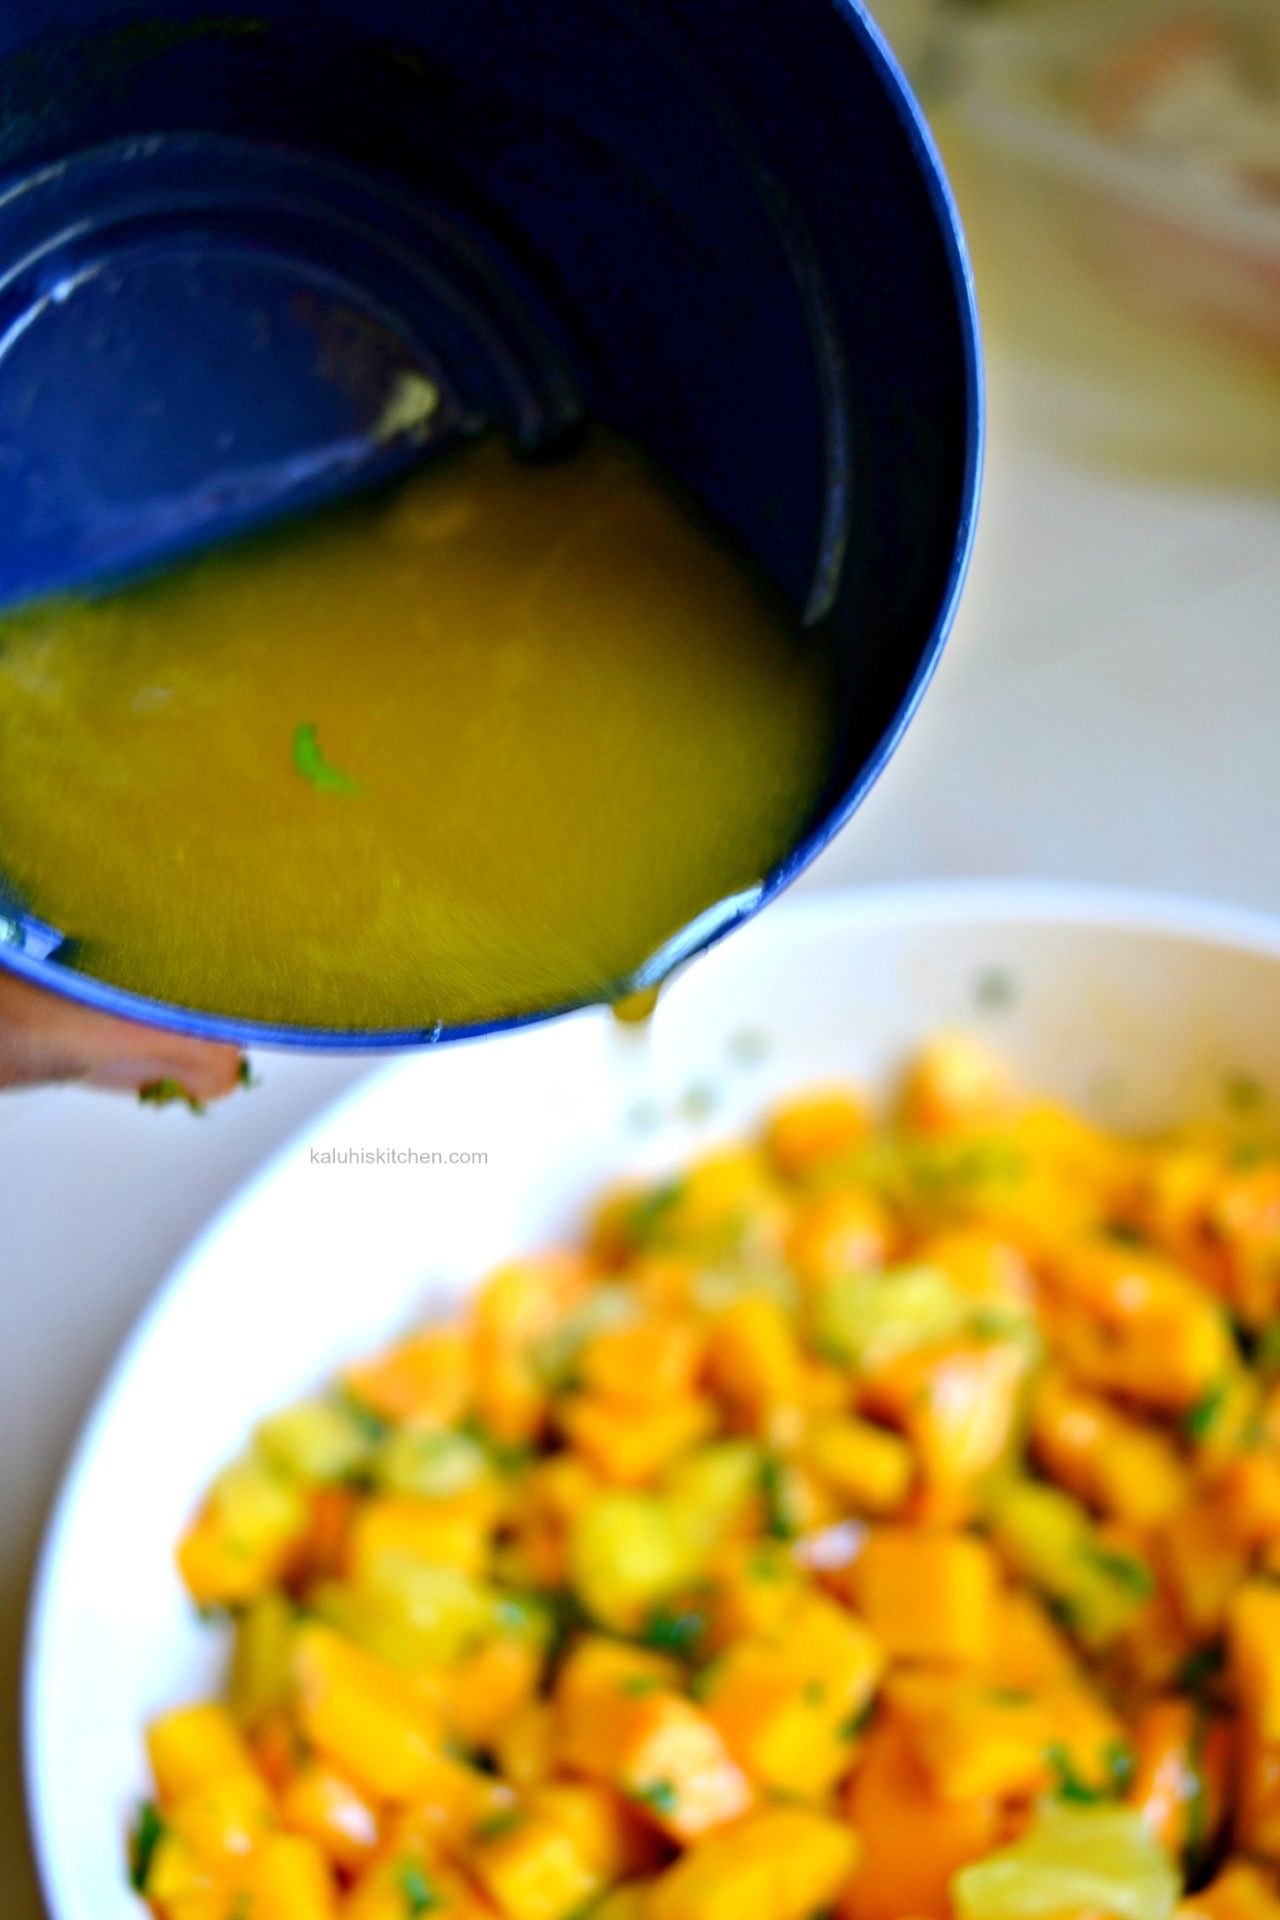 add the passion fruit syrup to the salad after it has cooled down and toss it all together_kaluhiskitchen.com_mango mint salad